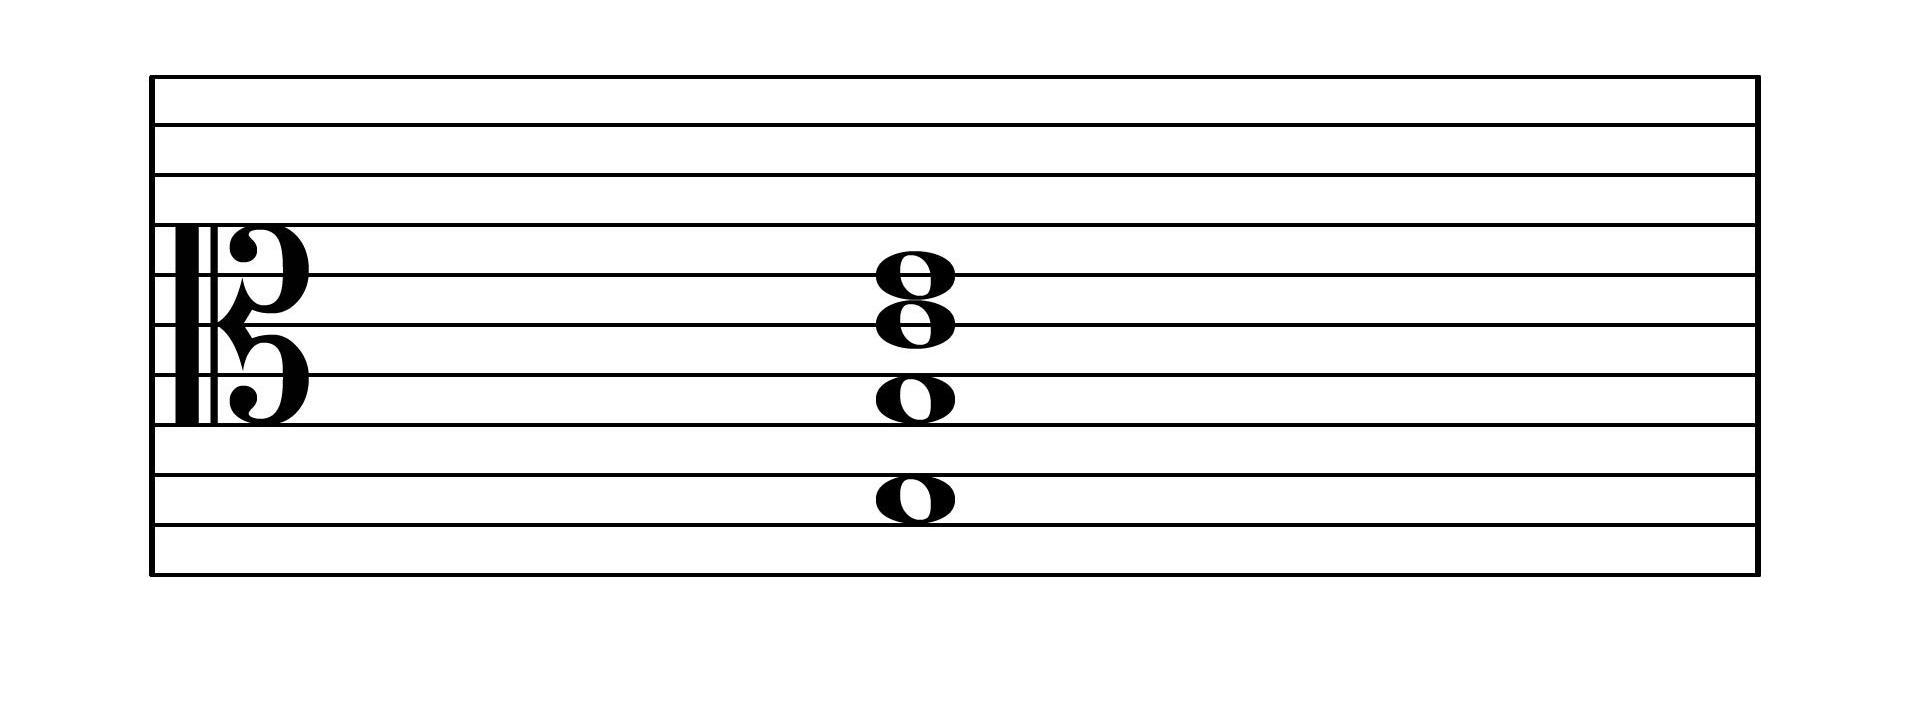 piano lessons chord 11 line